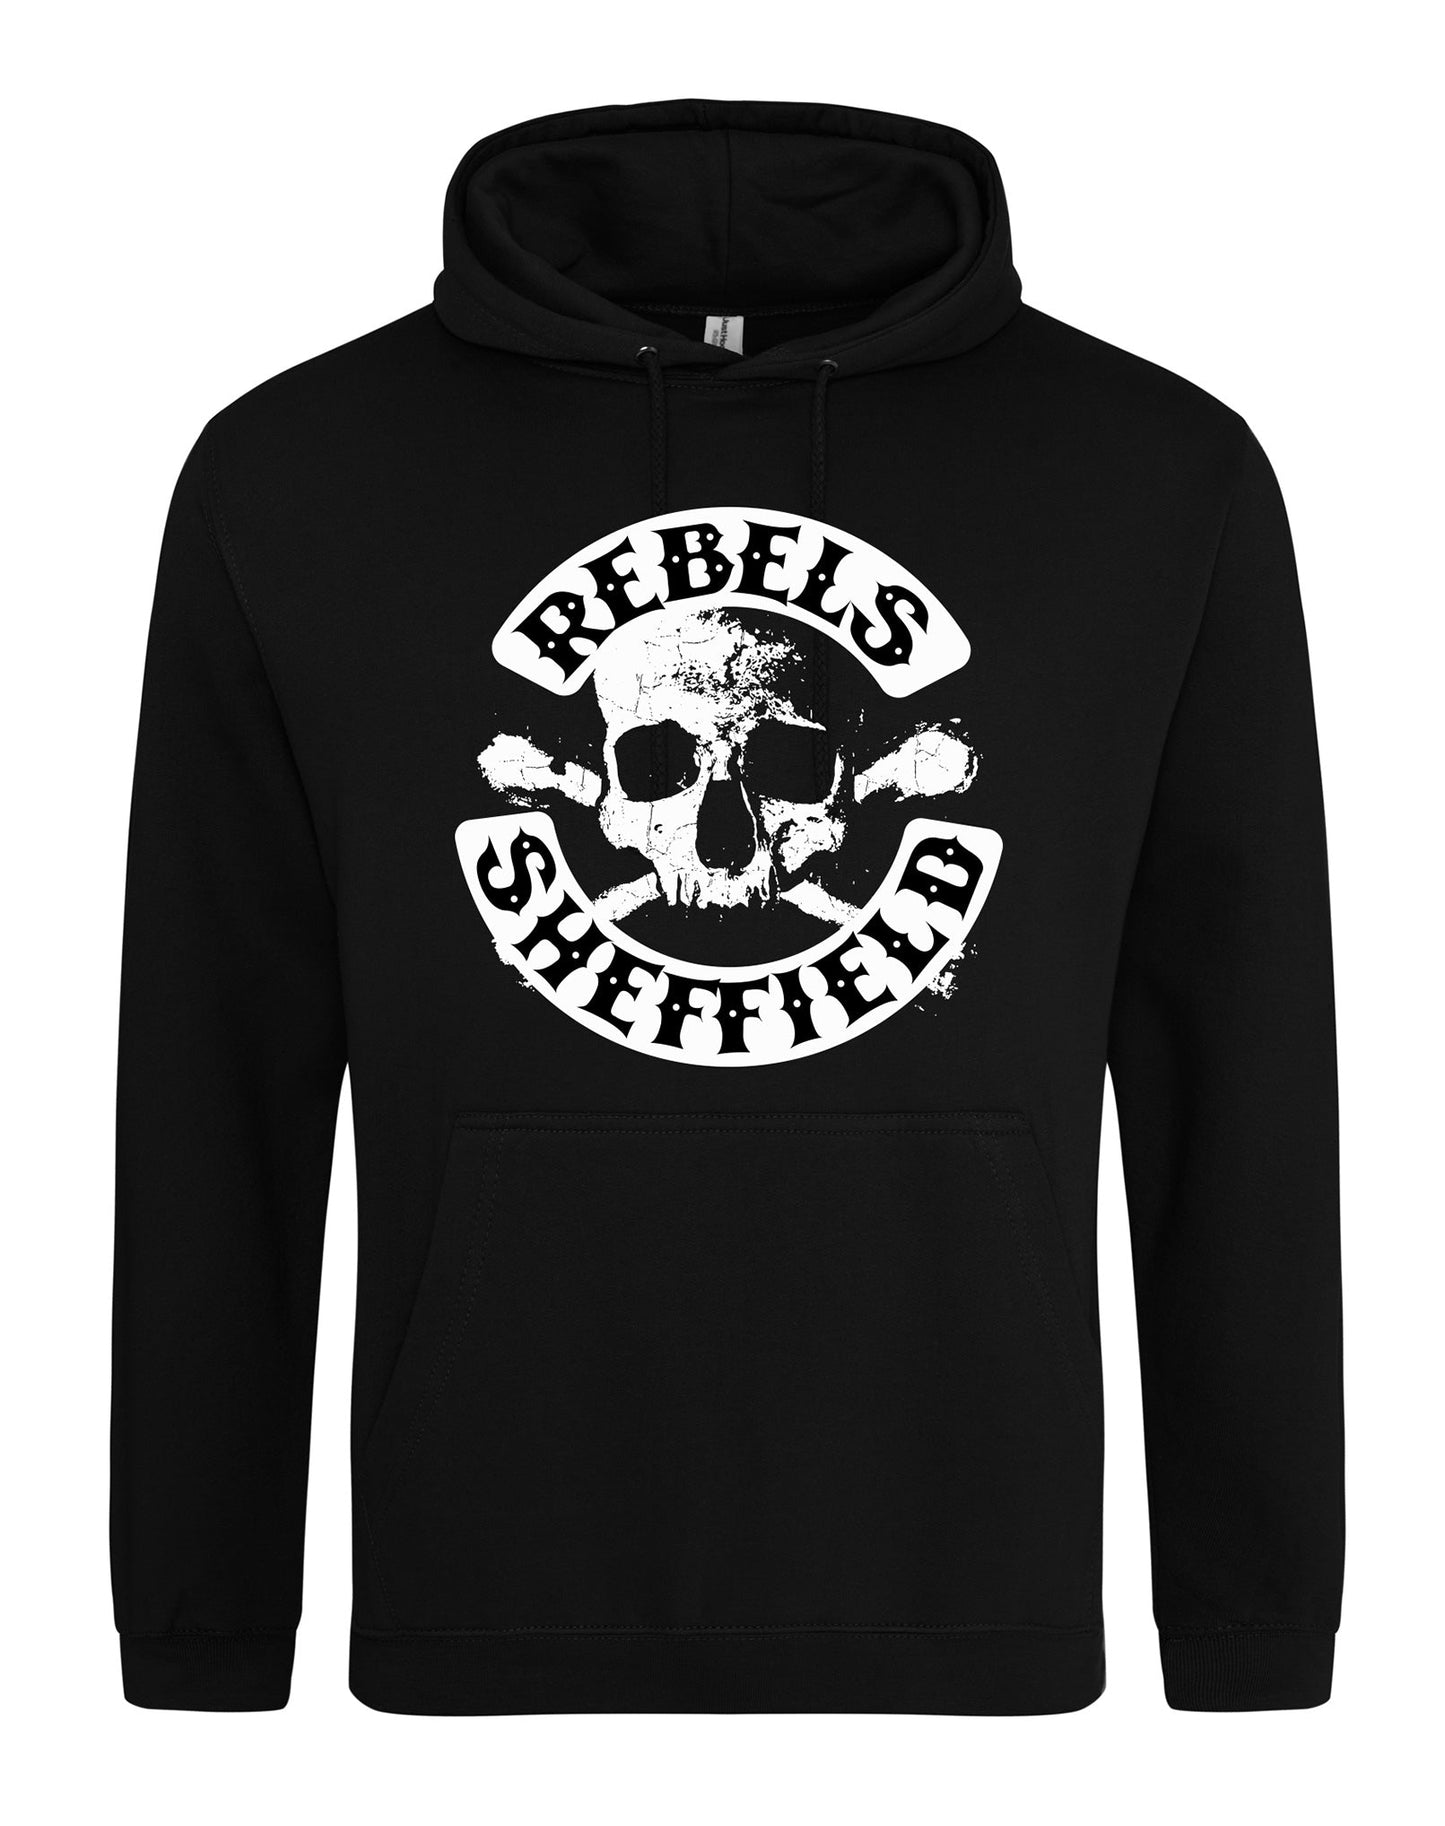 Rebels skull unisex fit hoodie - various colours - Dirty Stop Outs